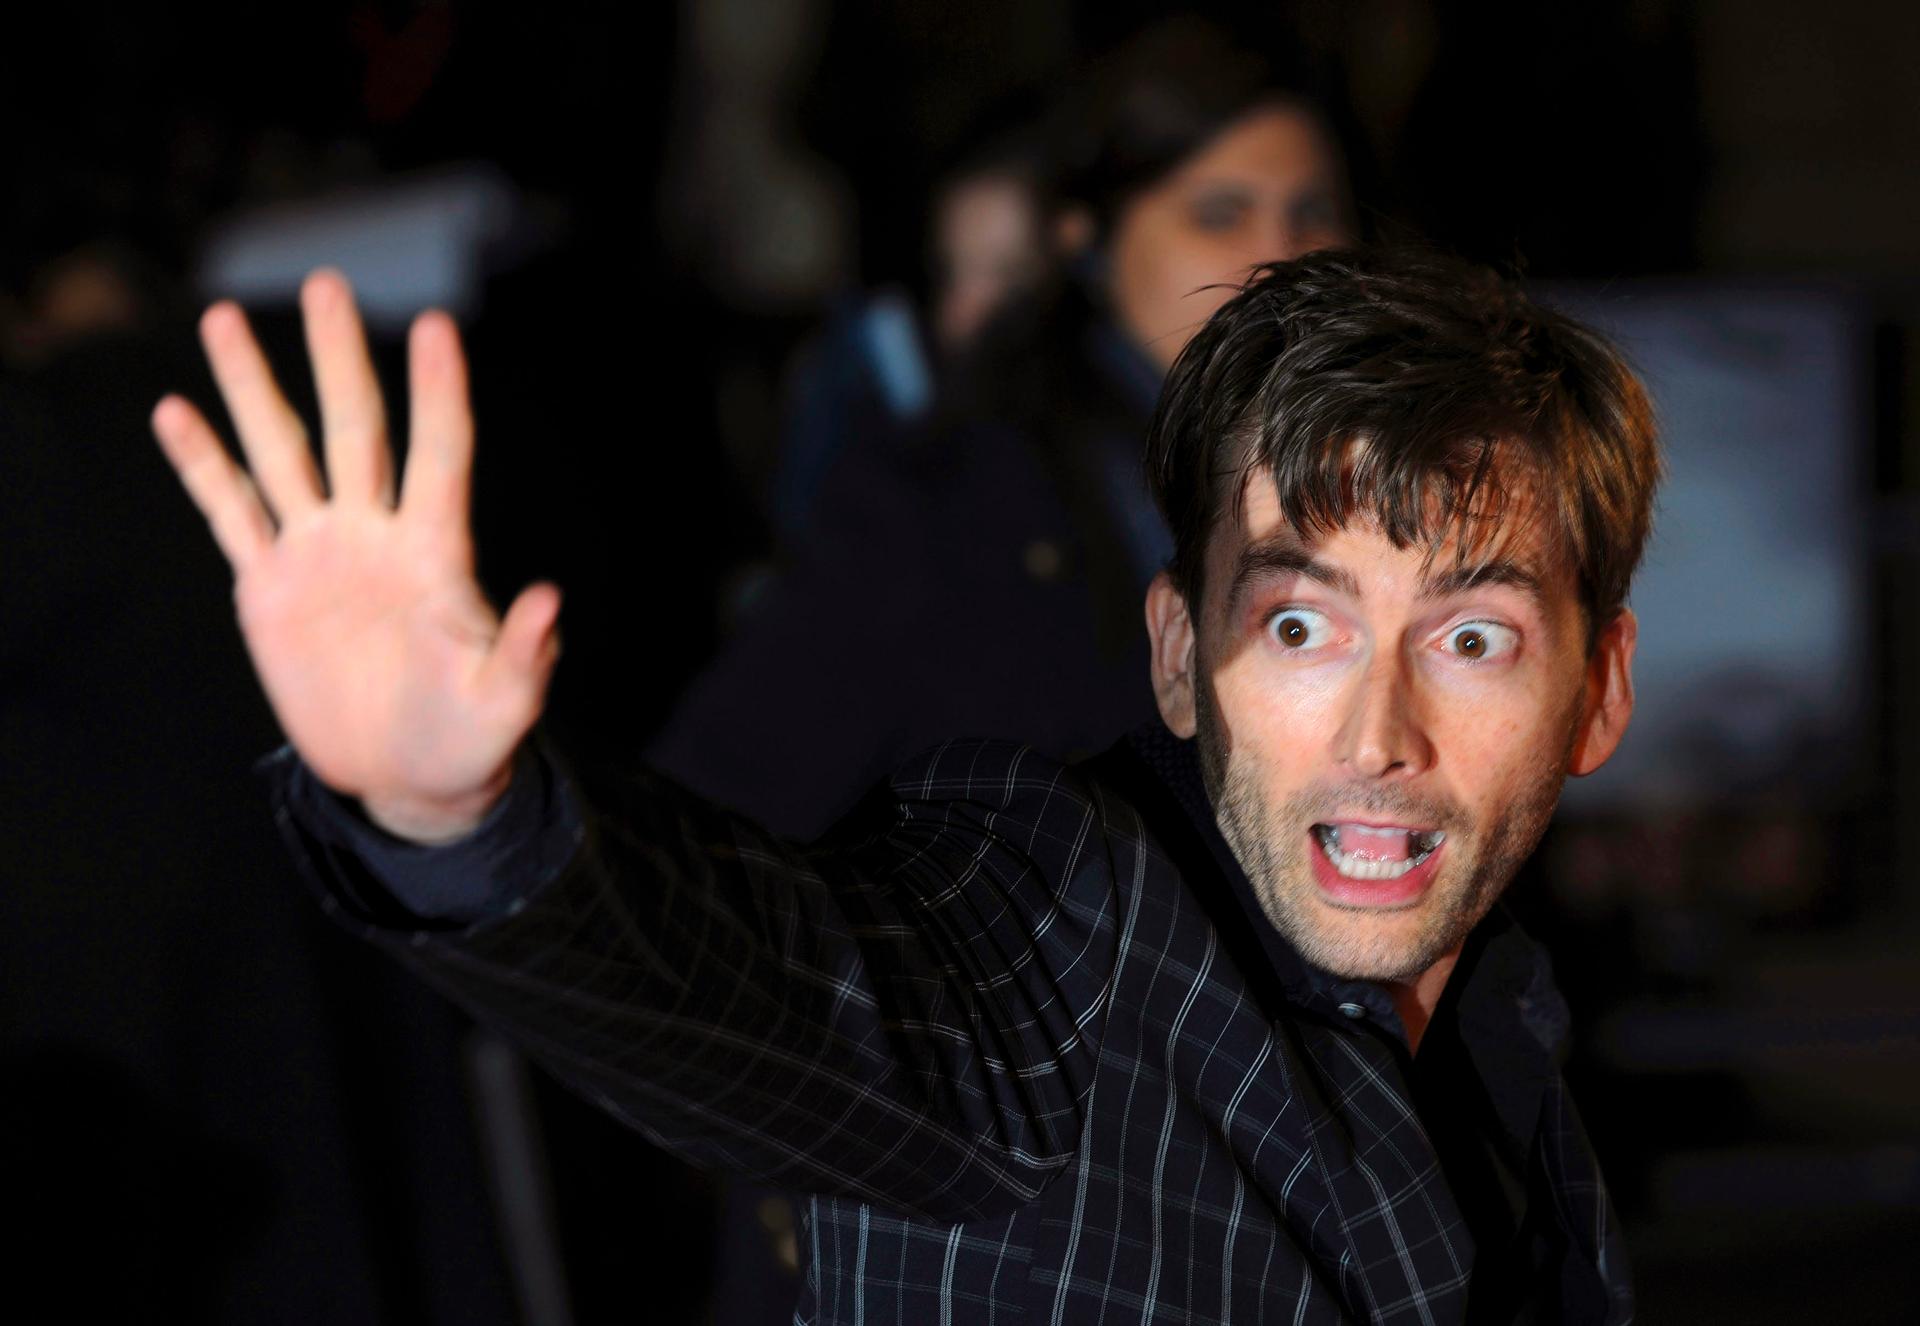 Dr. Who's David Tennant has shown a unexpected ability to talk about Shakespearean bears.